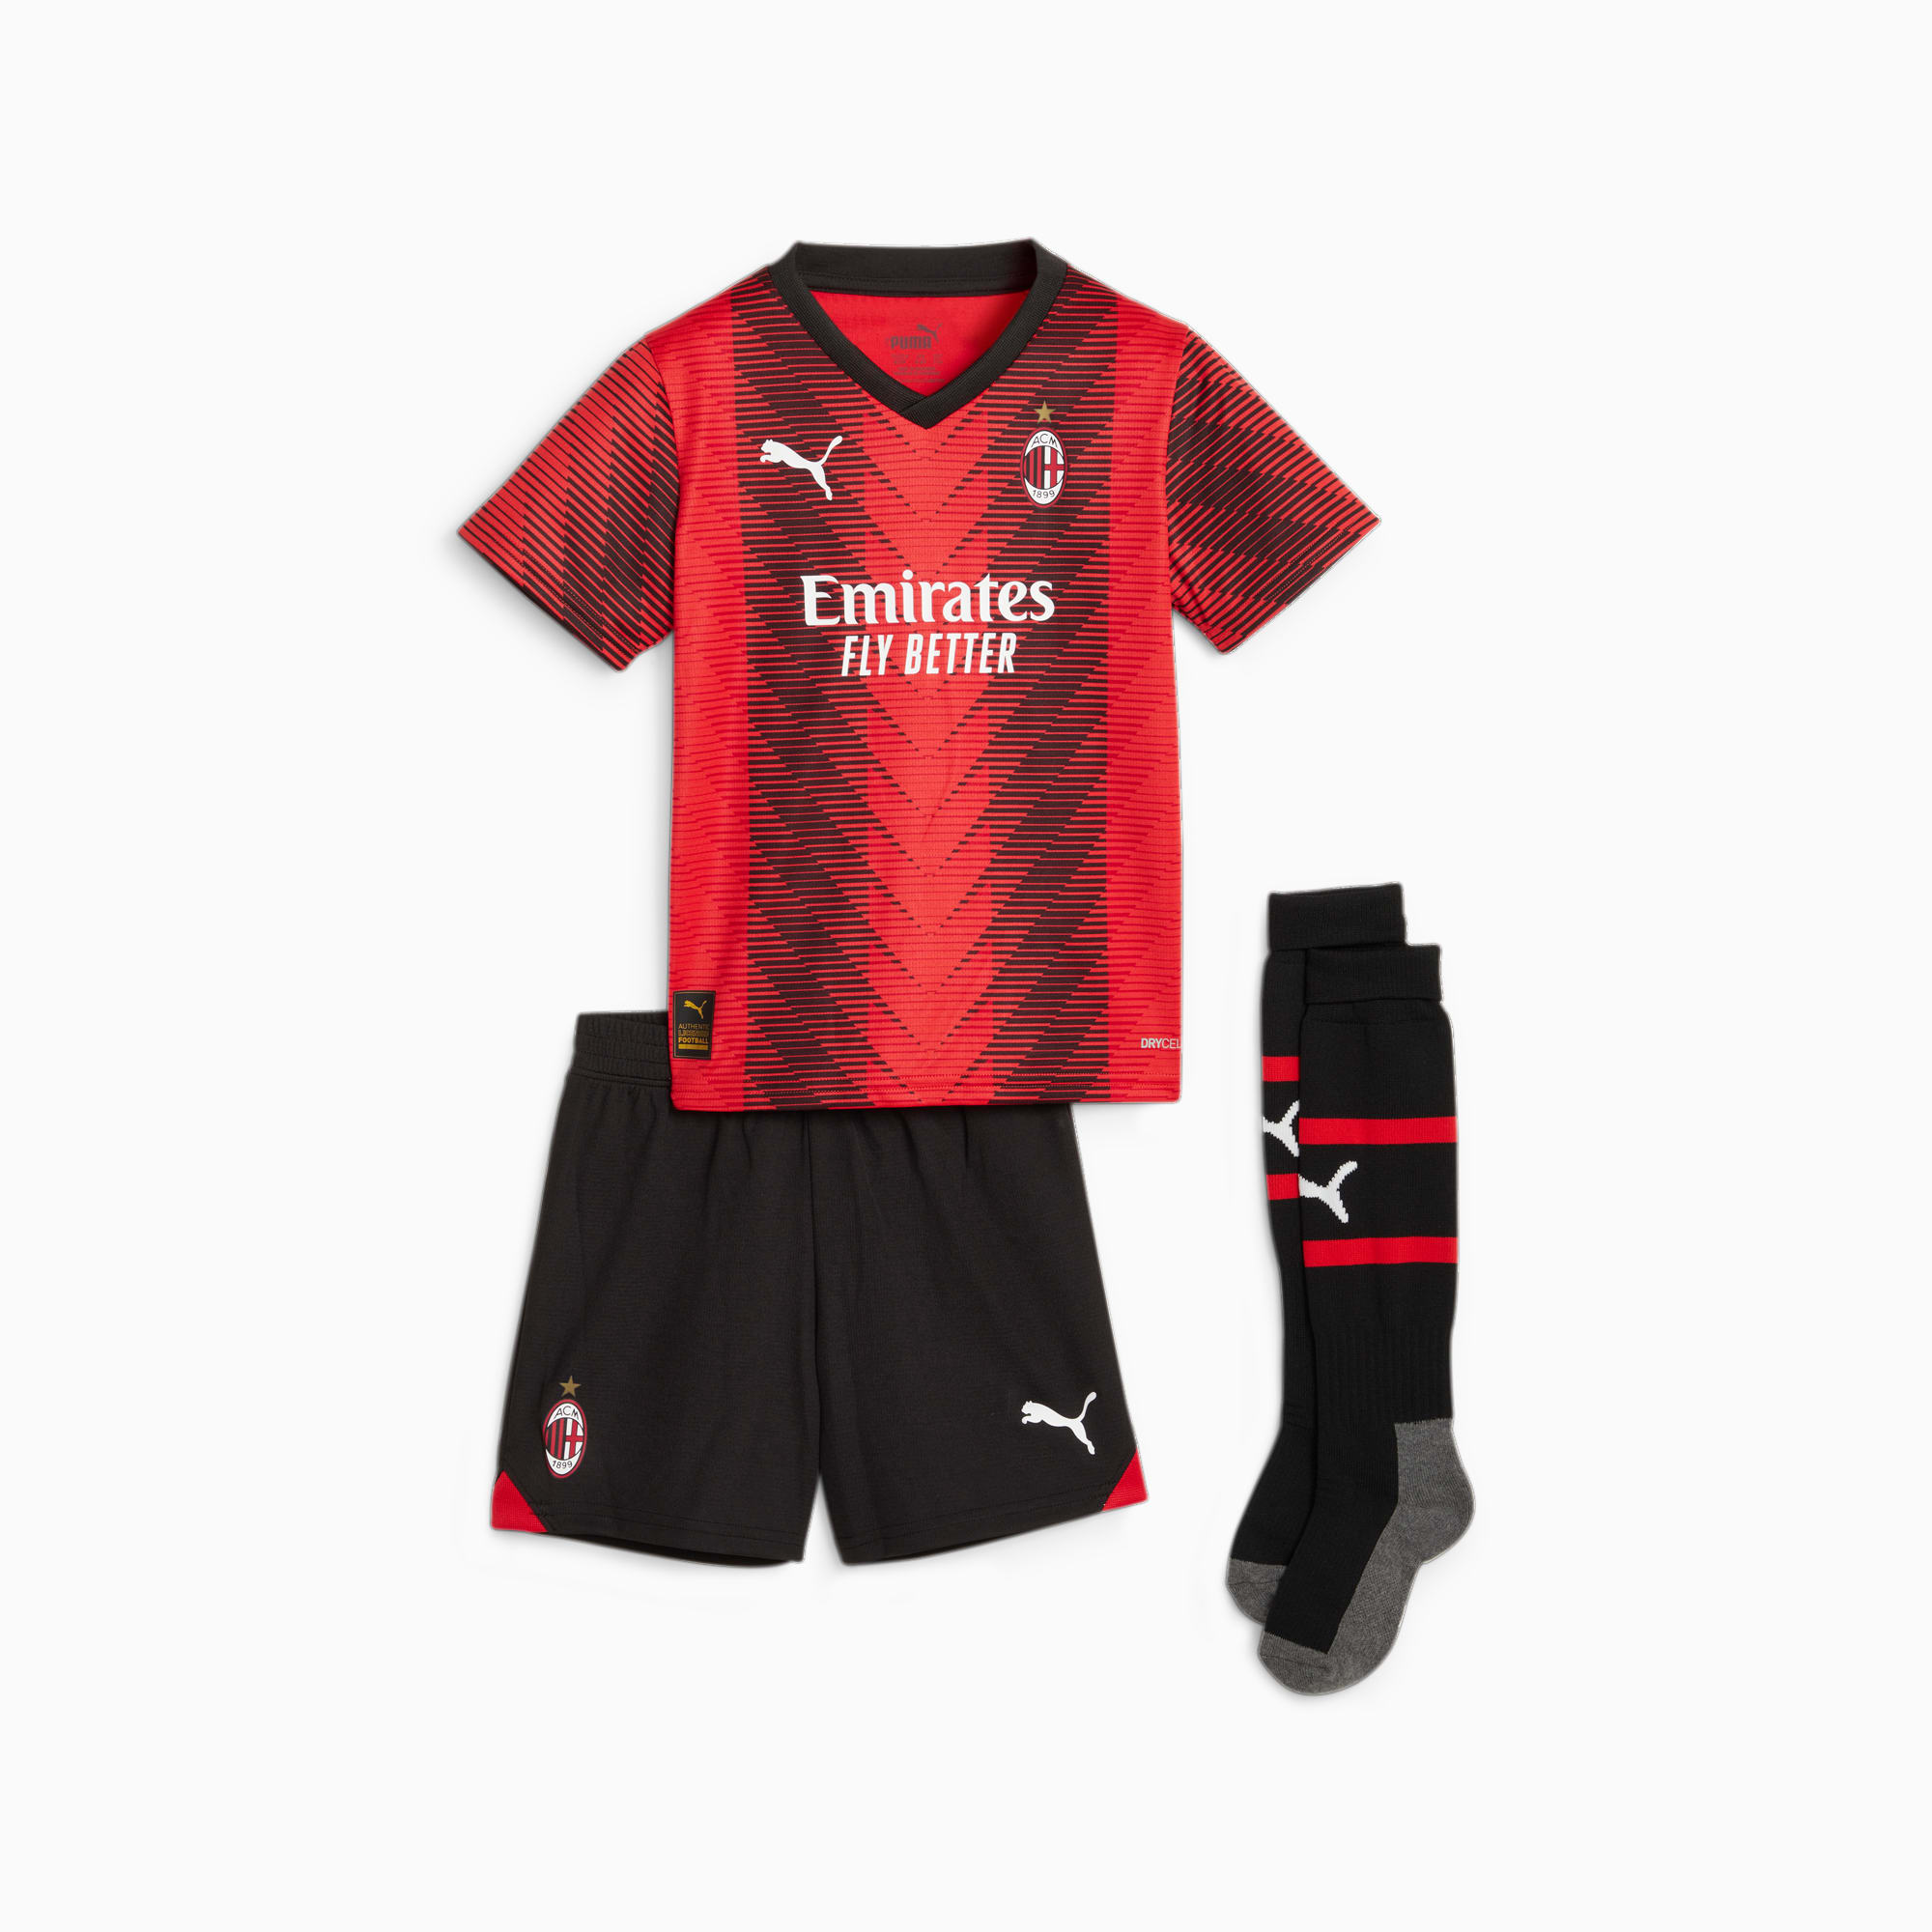 PUMA A.C. Milan 23/24 Home Mini Kit, For All Time Red/Black, Size 98, Clothing